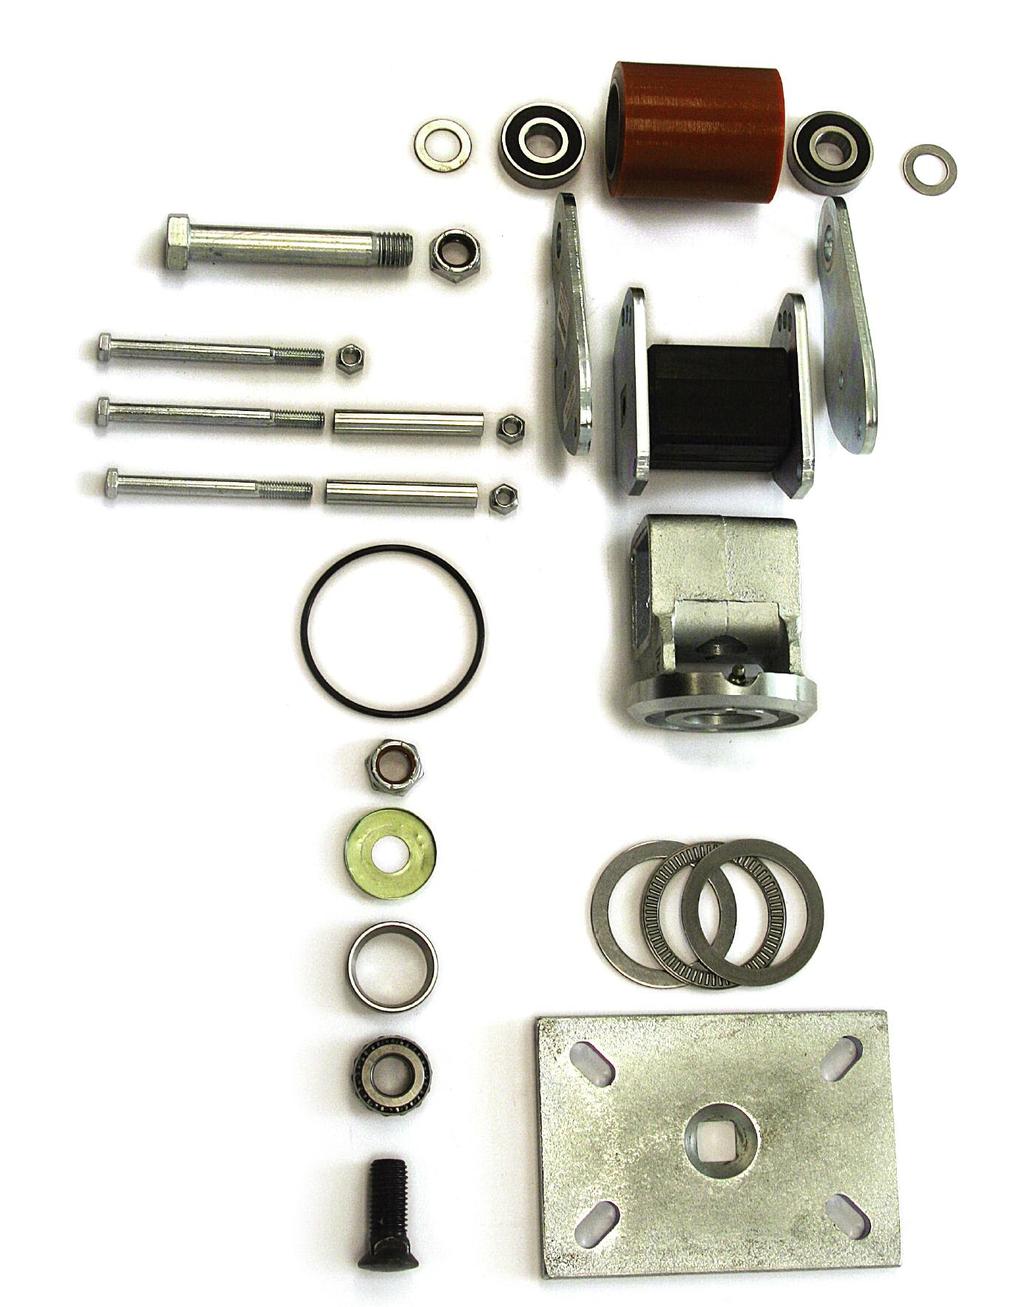 Caster Assemblies - Caster Without Springs Caster Assemblies - Caster Without Springs 1 13 1 6 3 2 1 1 18 3 2 RA 1087 Caster Assembly, Springless, 9A Durometer, Includes All Parts Listed 1 RA 671-01